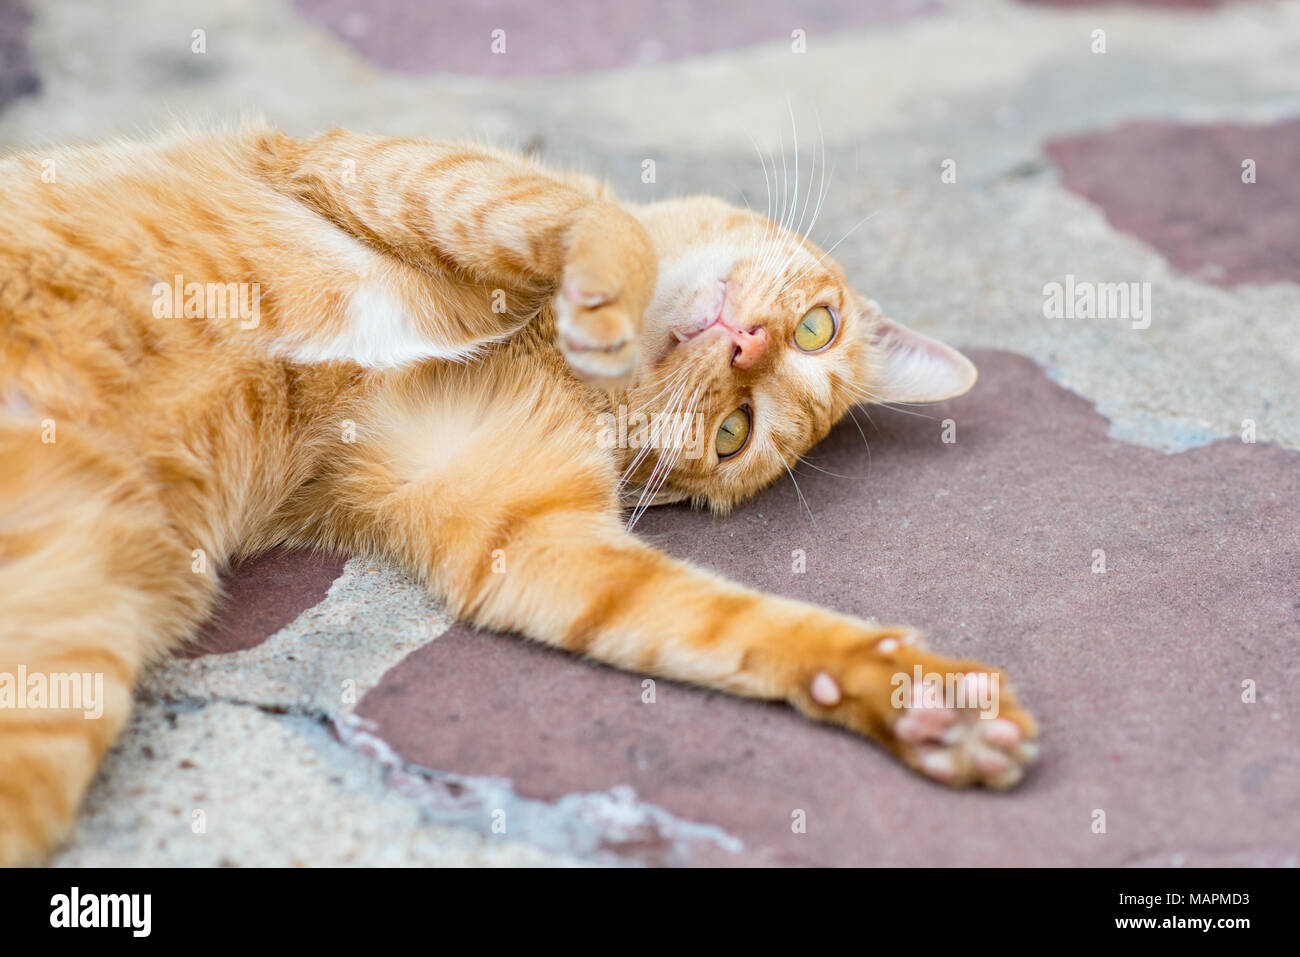 Playful red cat rolls on the shabby concrete floor outdoors Stock Photo